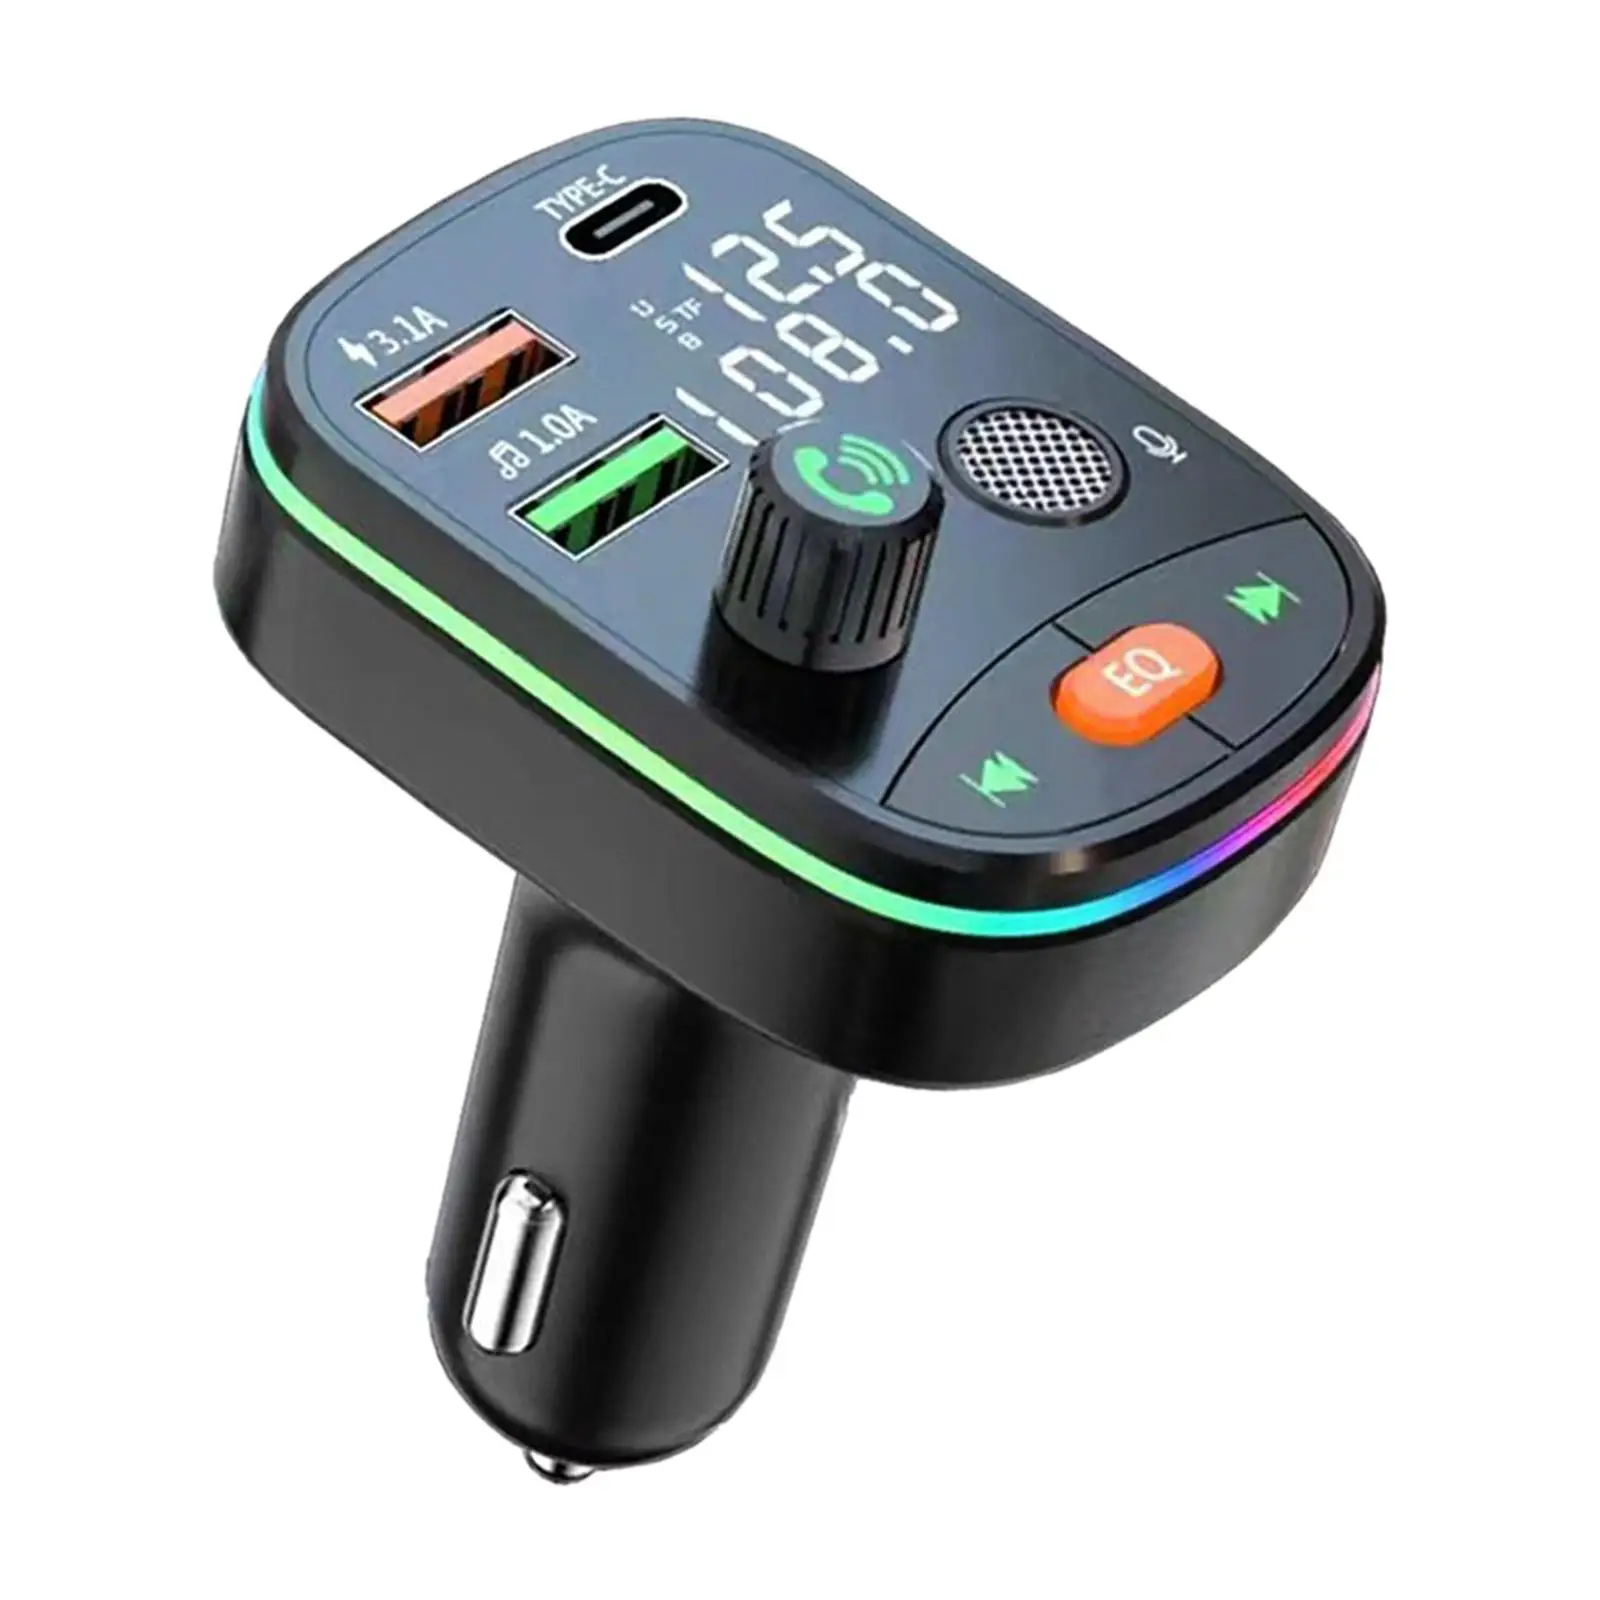 V5.0 FM Bluetooth Transmitter Colorful Atmosphere Lights Dual Screens Display Easy to Install Handsfree Calling Music Player